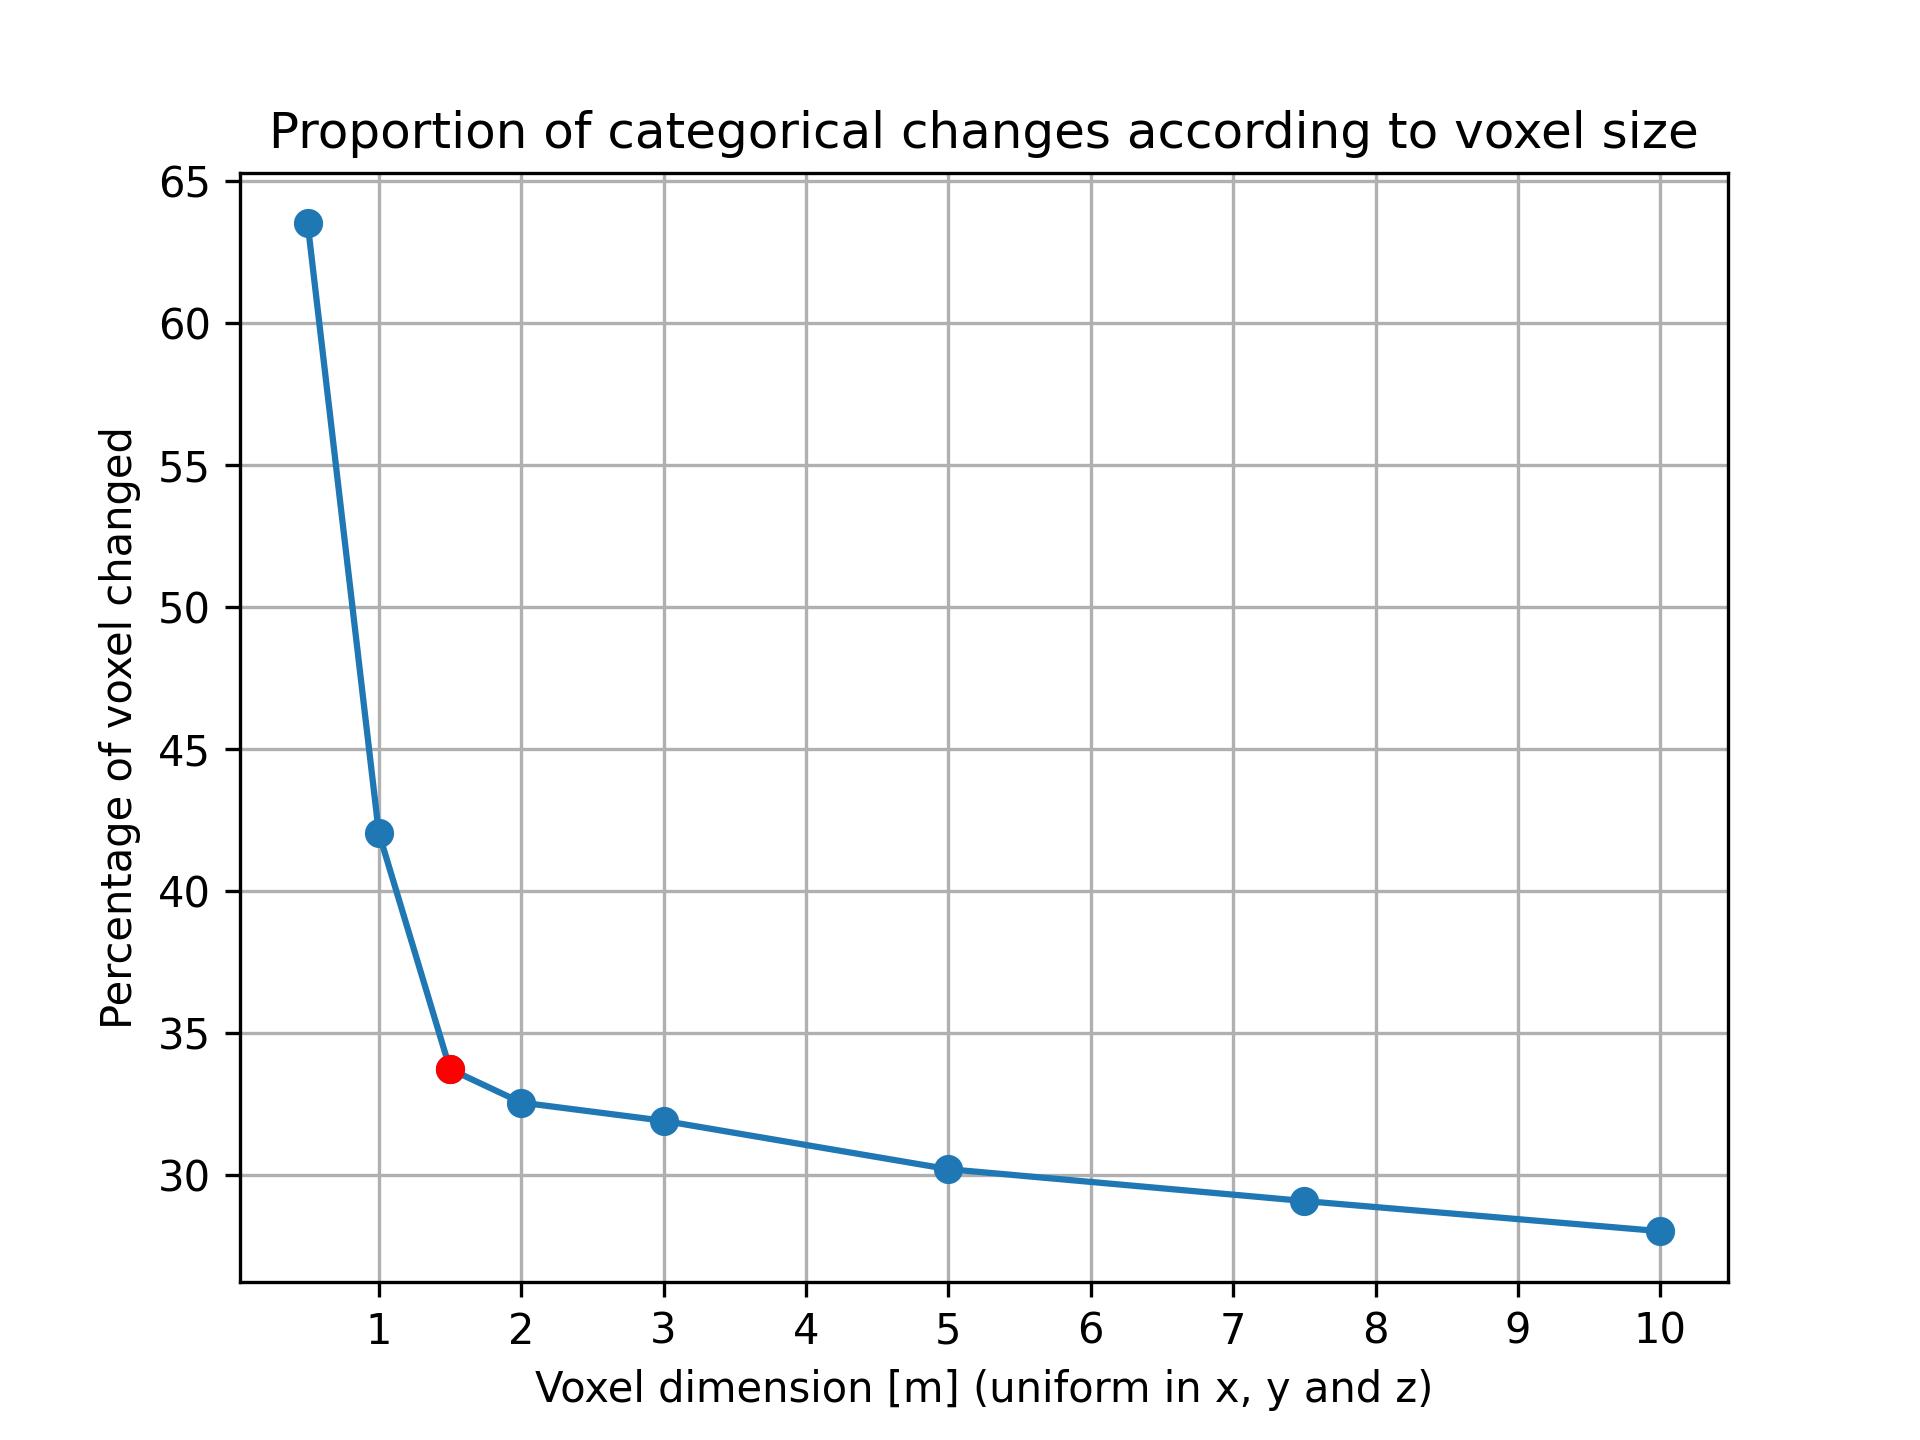 Proportion of categorical changes for different voxel size in tile B.